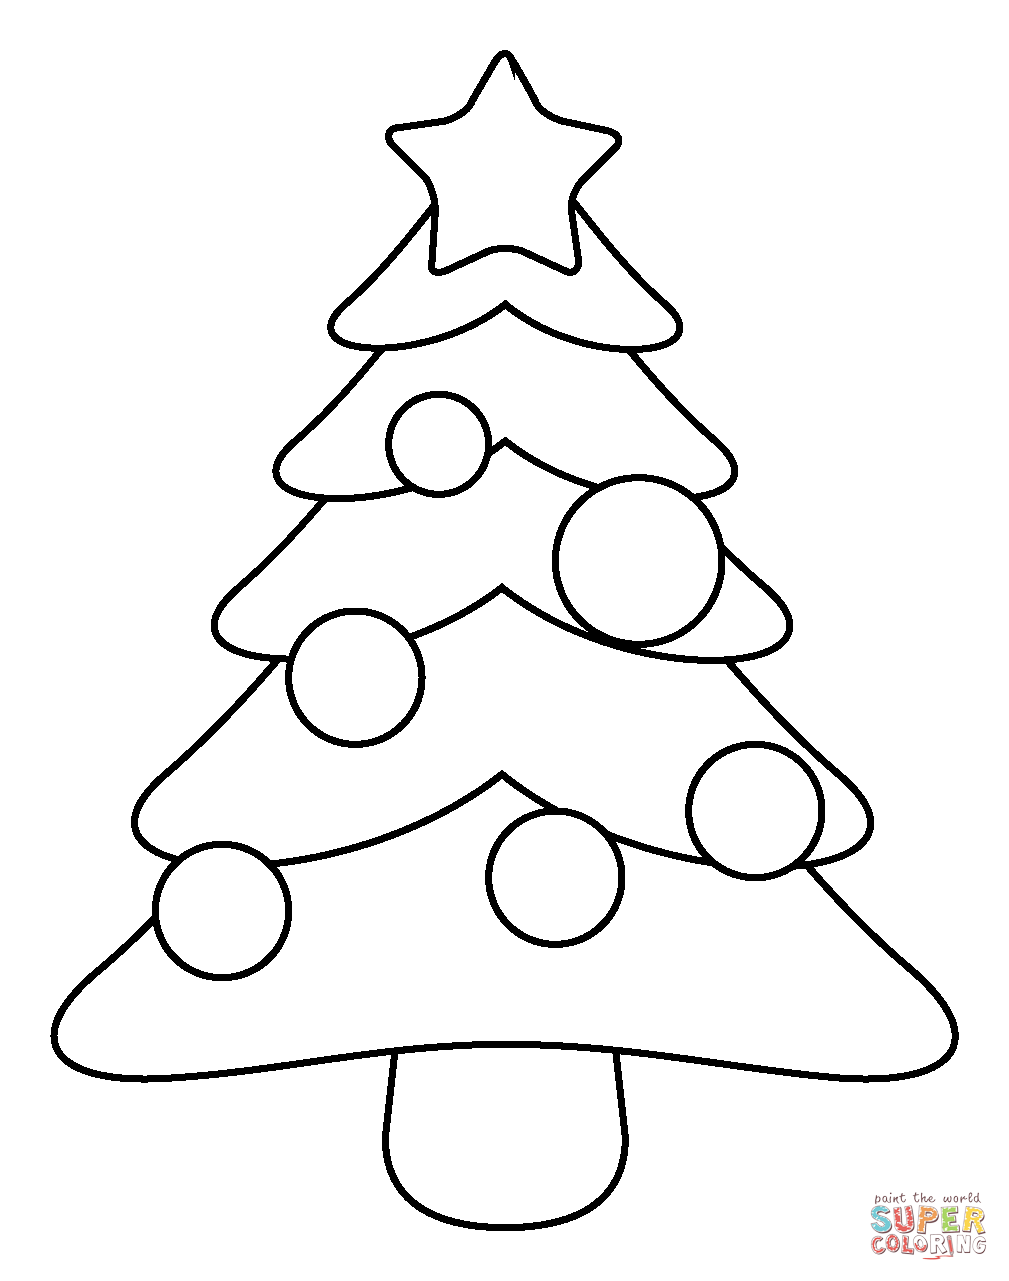 Christmas tree emoji coloring page free printable coloring pages